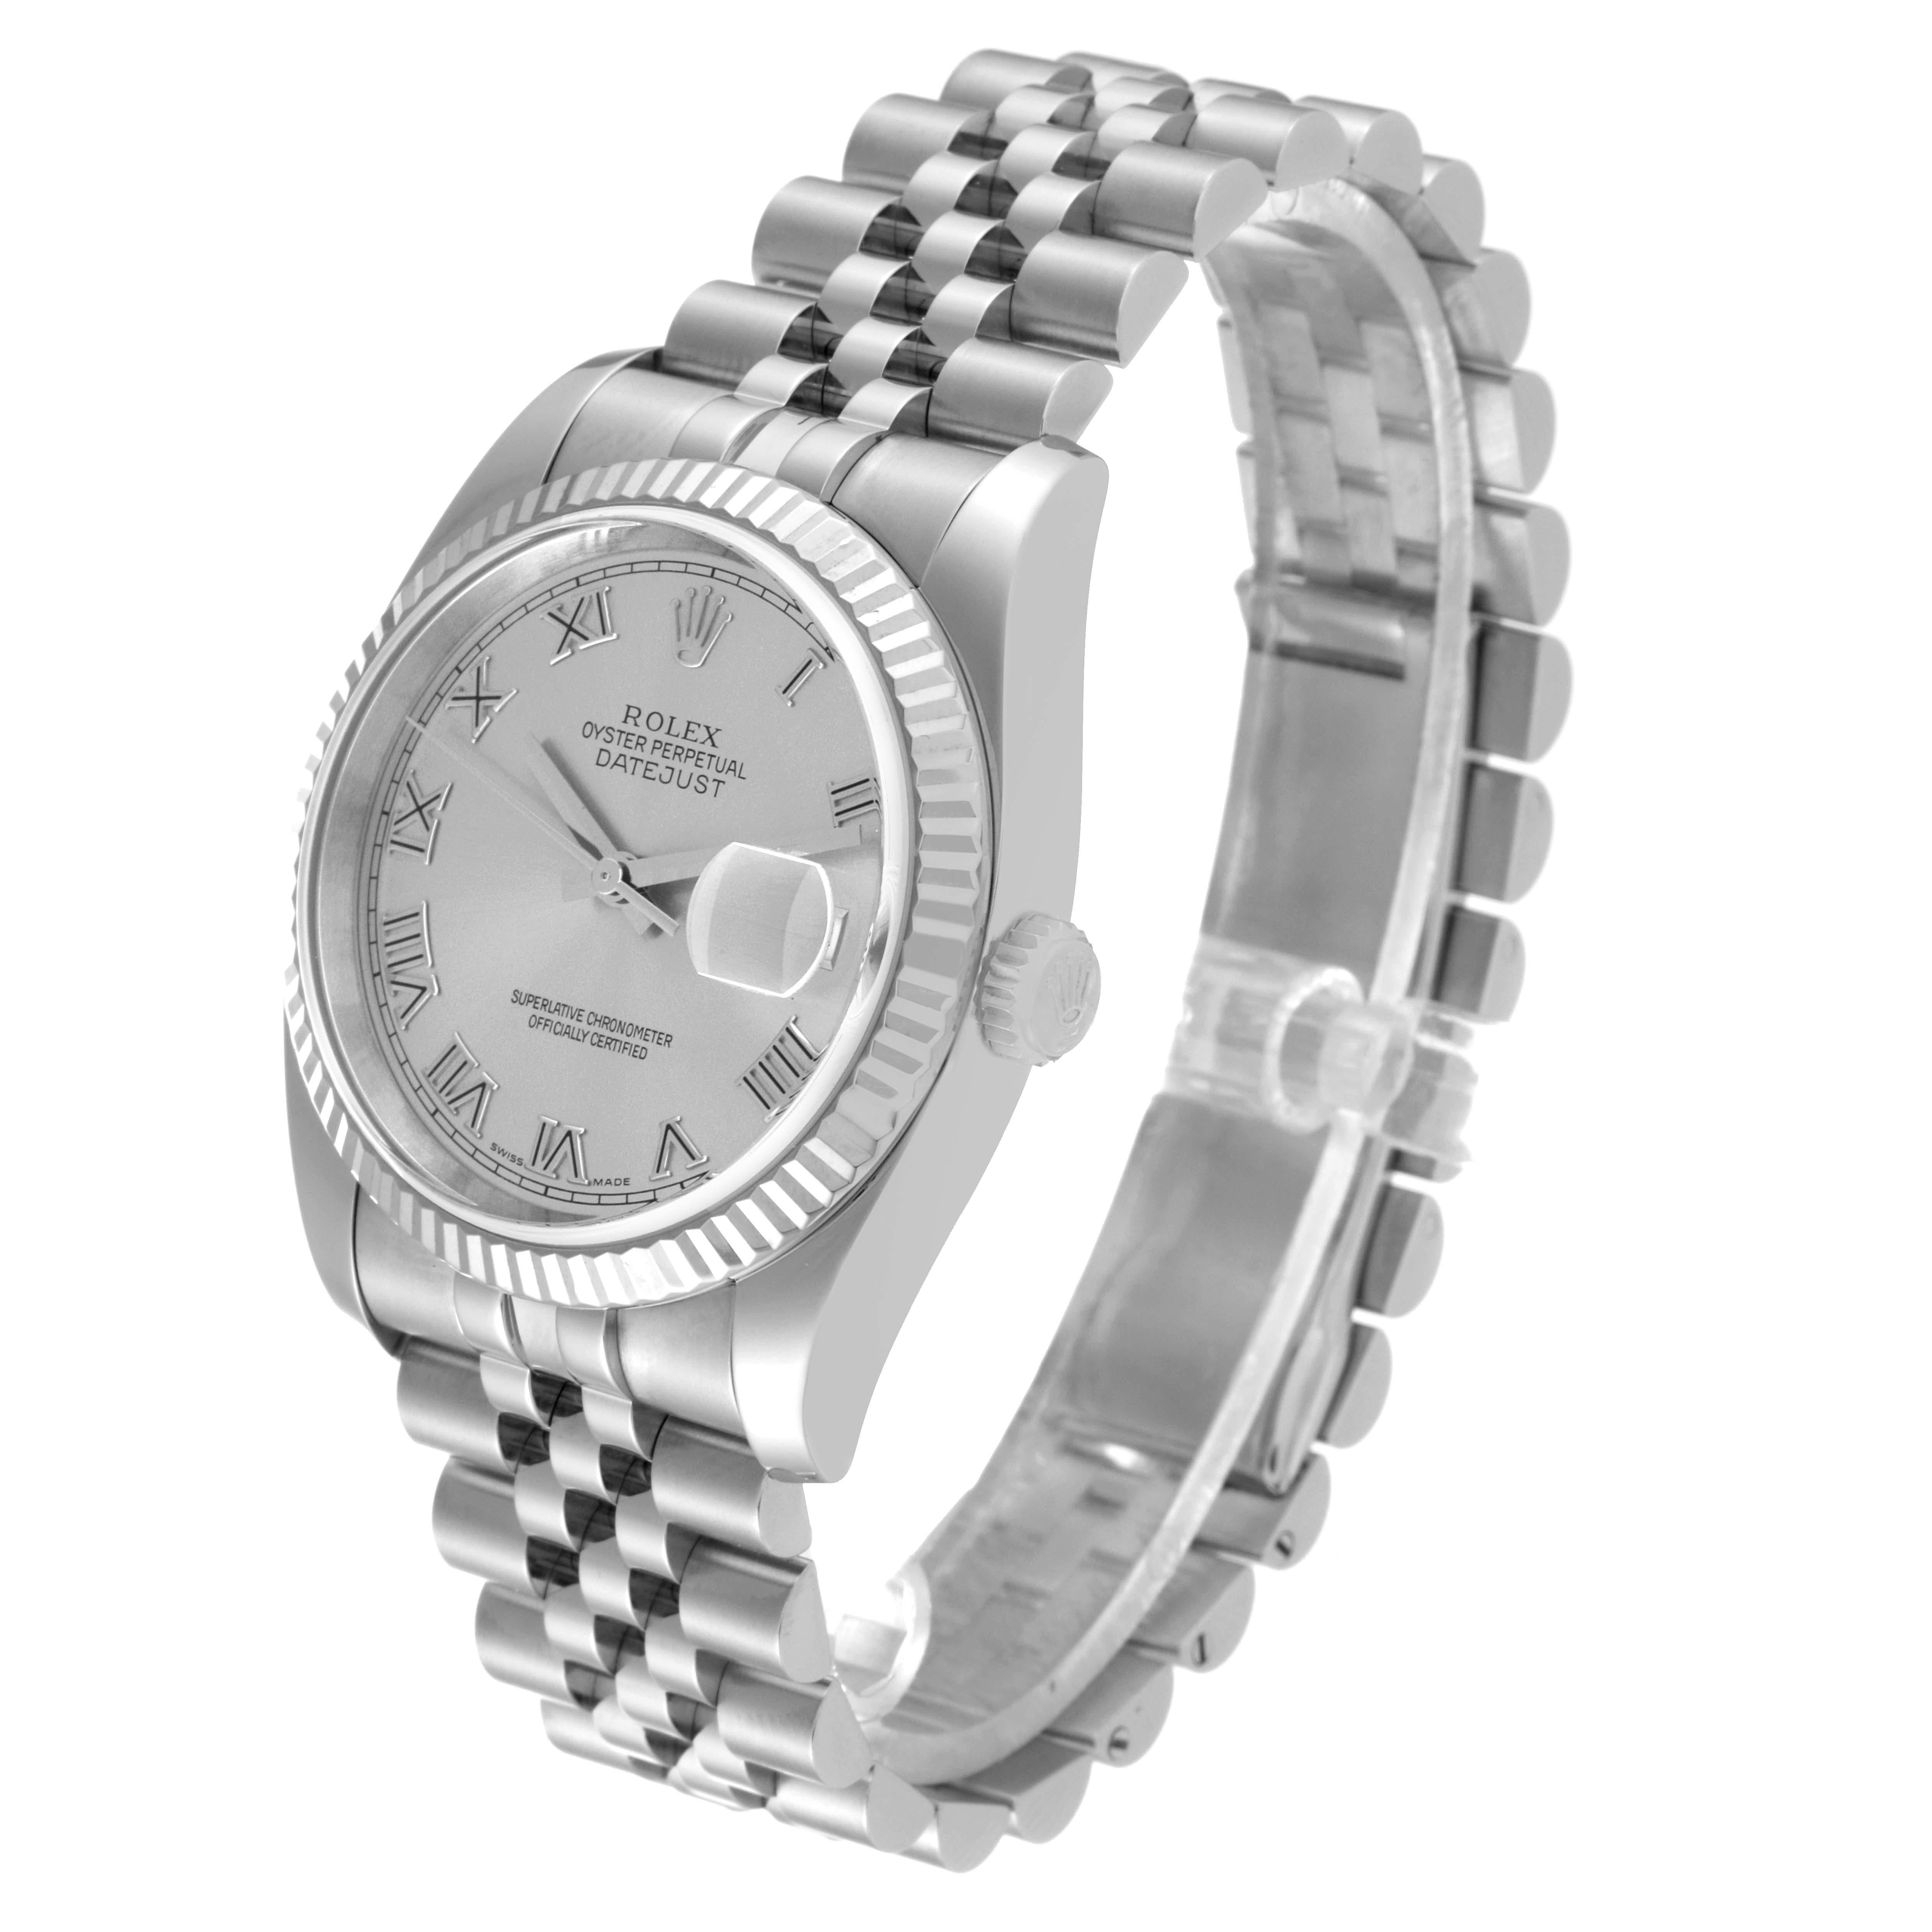 Rolex Datejust Steel White Gold Silver Roman Dial Mens Watch 116234 For Sale 8